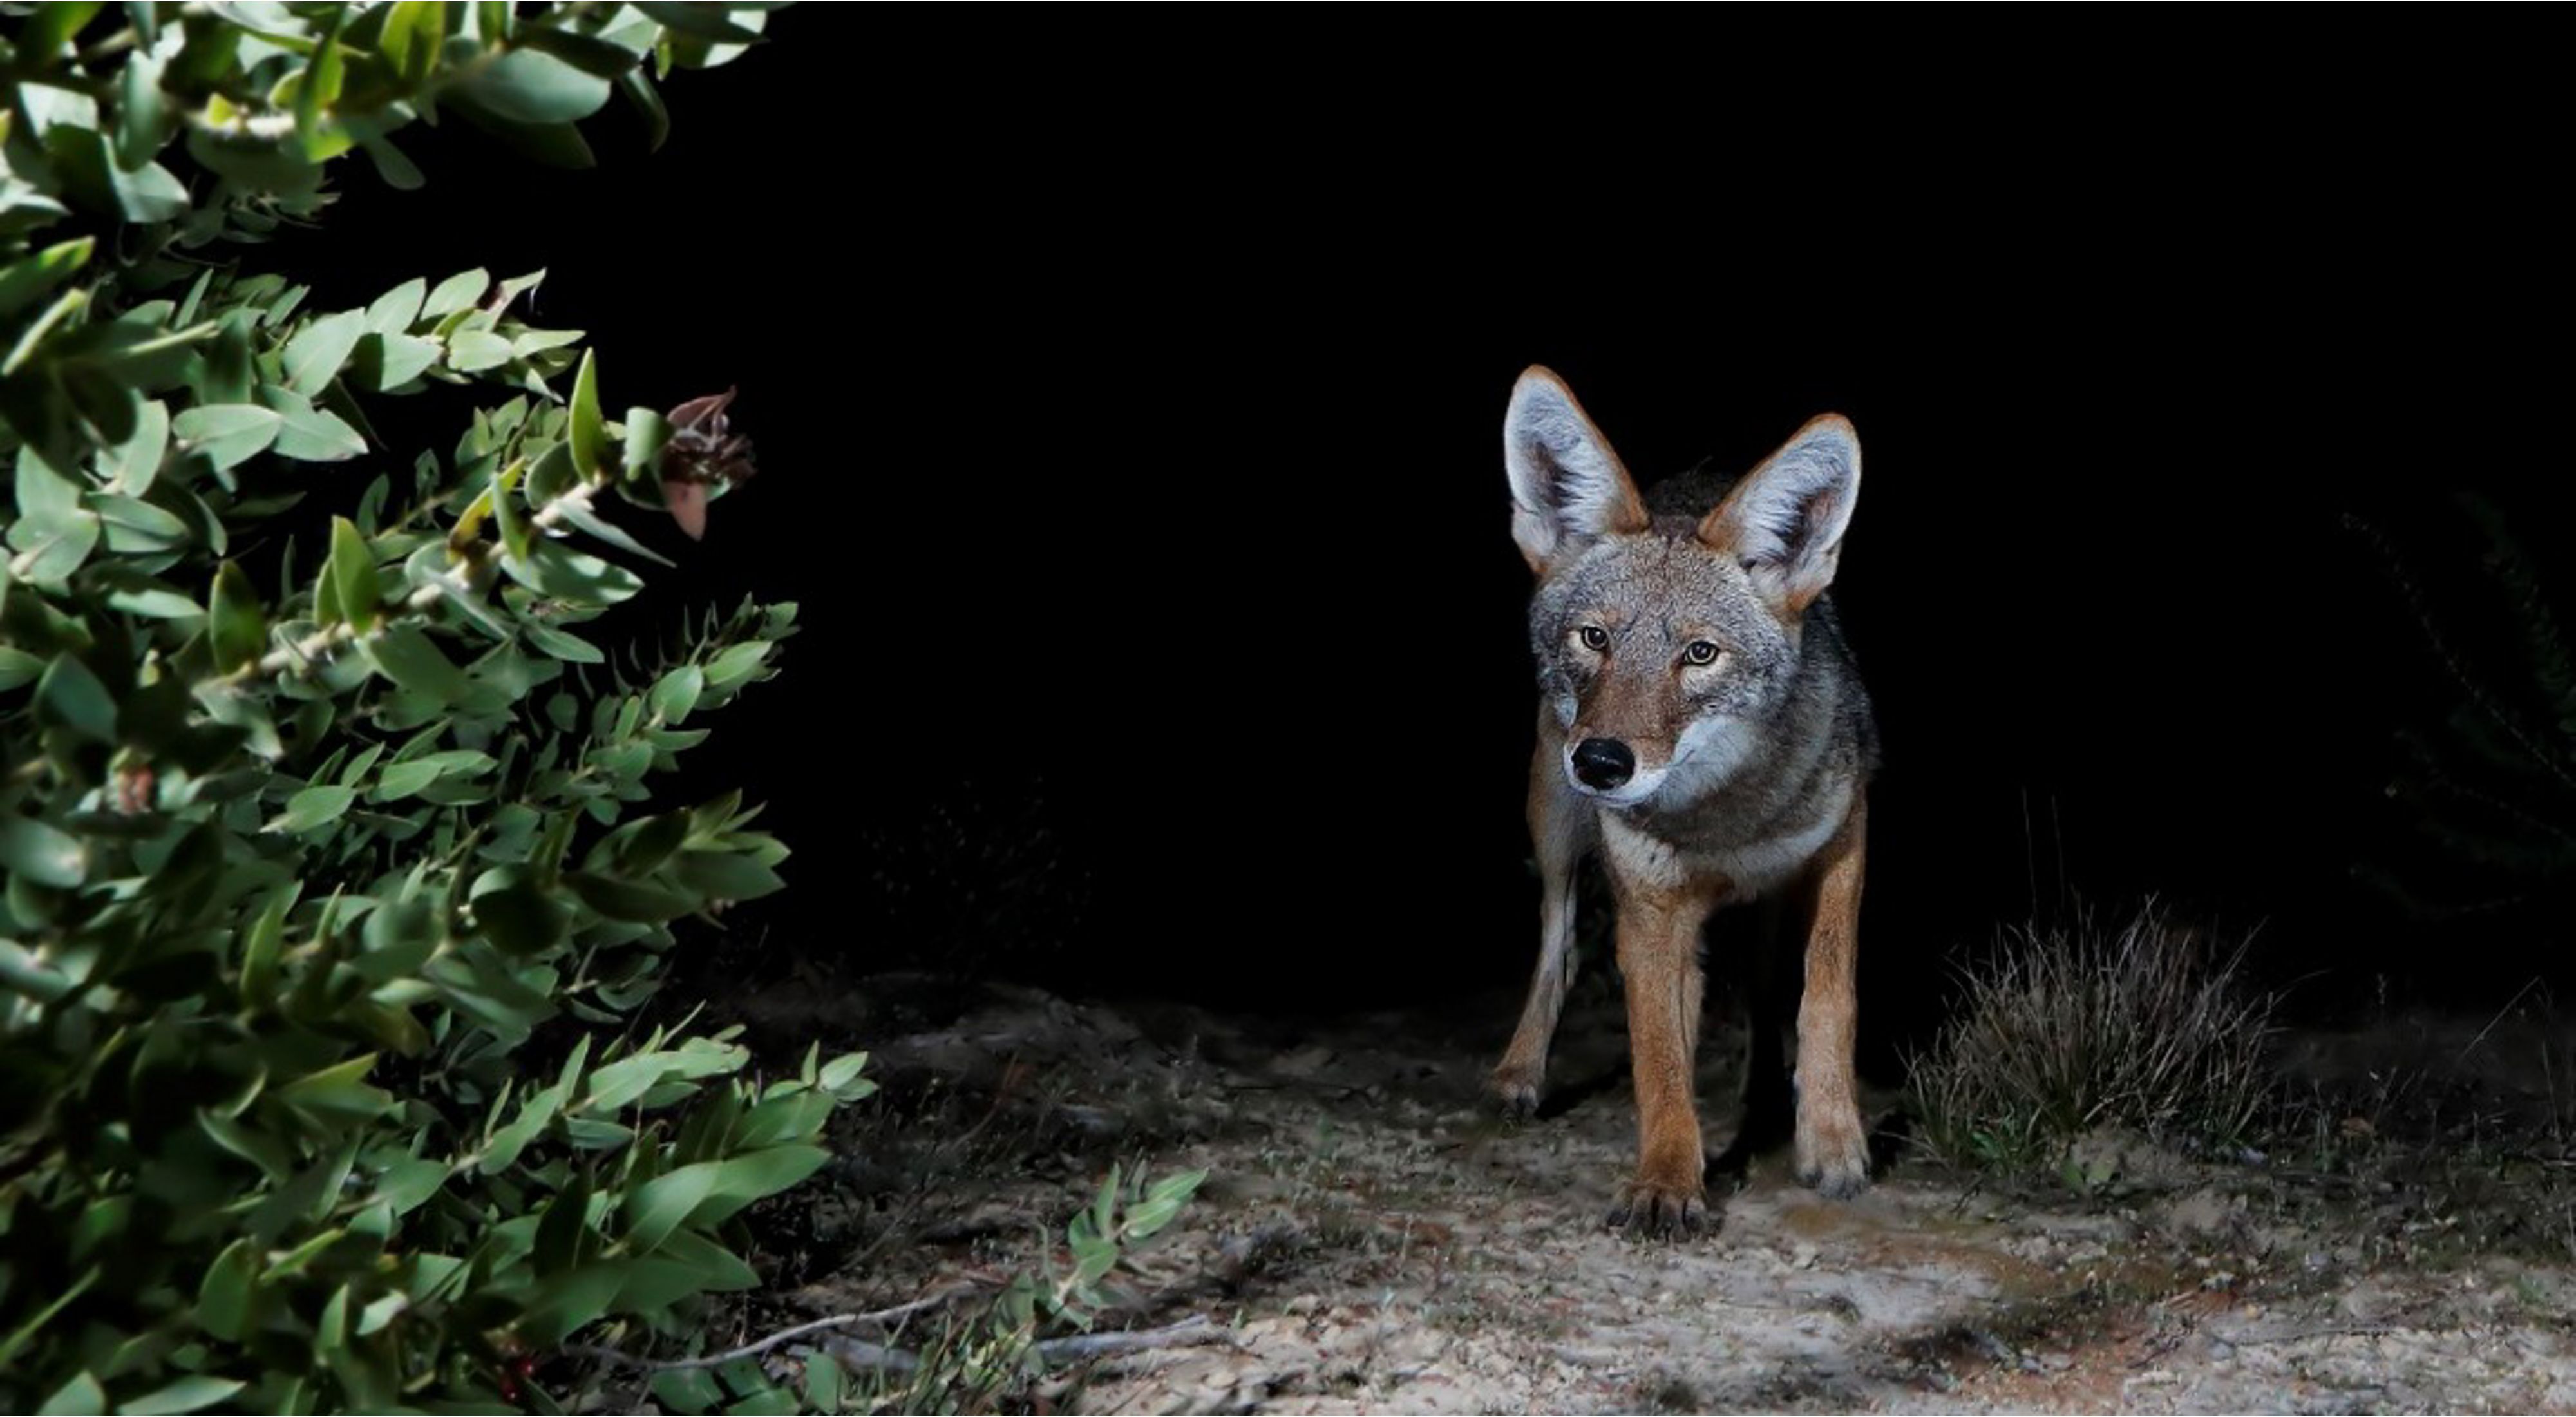 A coyote walks towards the camera on a sandy path in the dark.